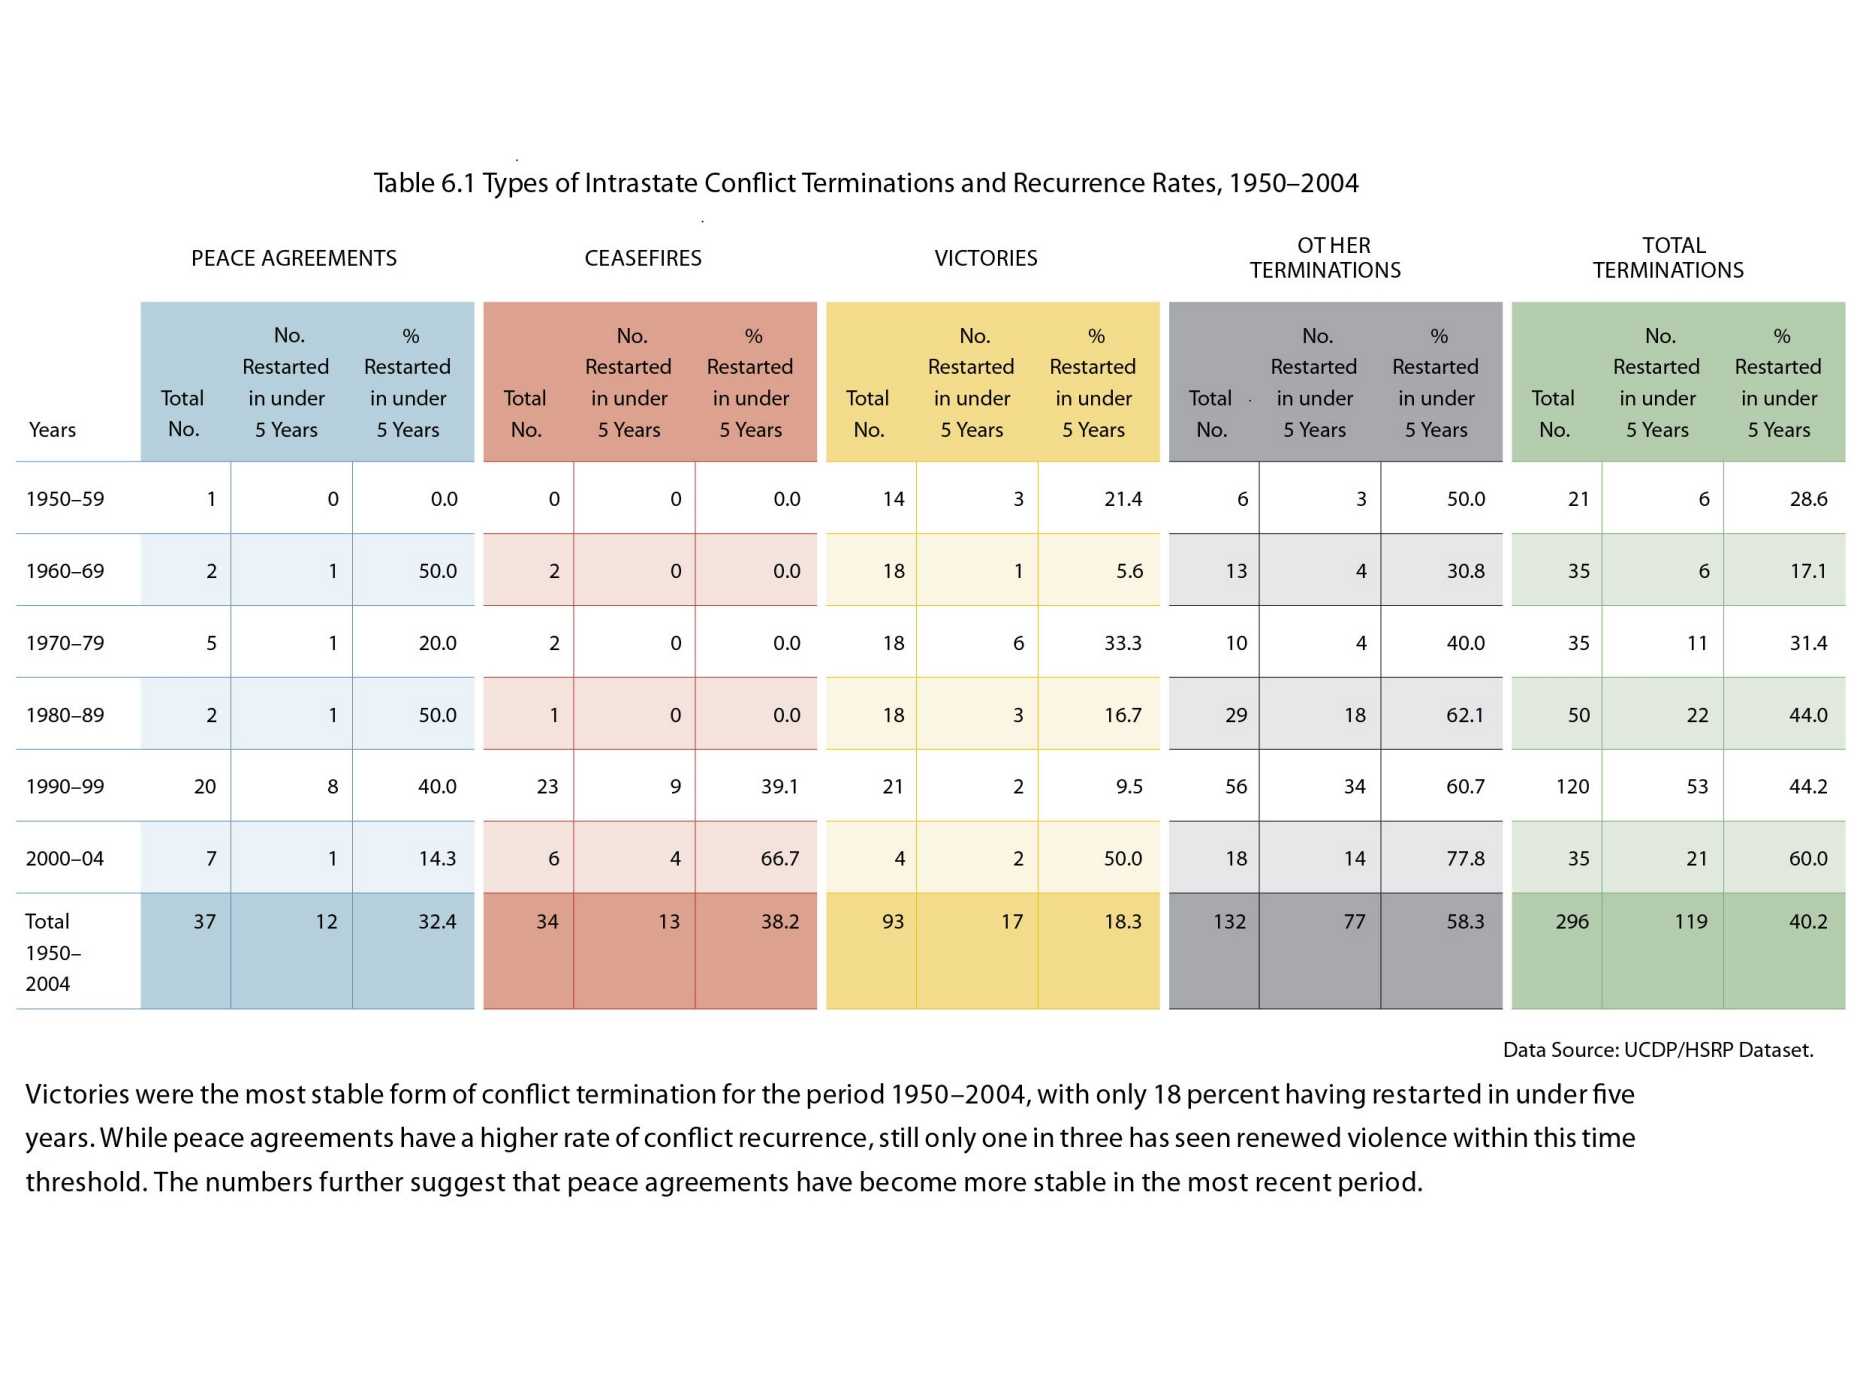 Enlarged view: Table 6.1: Types of Intrastate Conflict Terminations and Recurrence Rates, 1950-2004